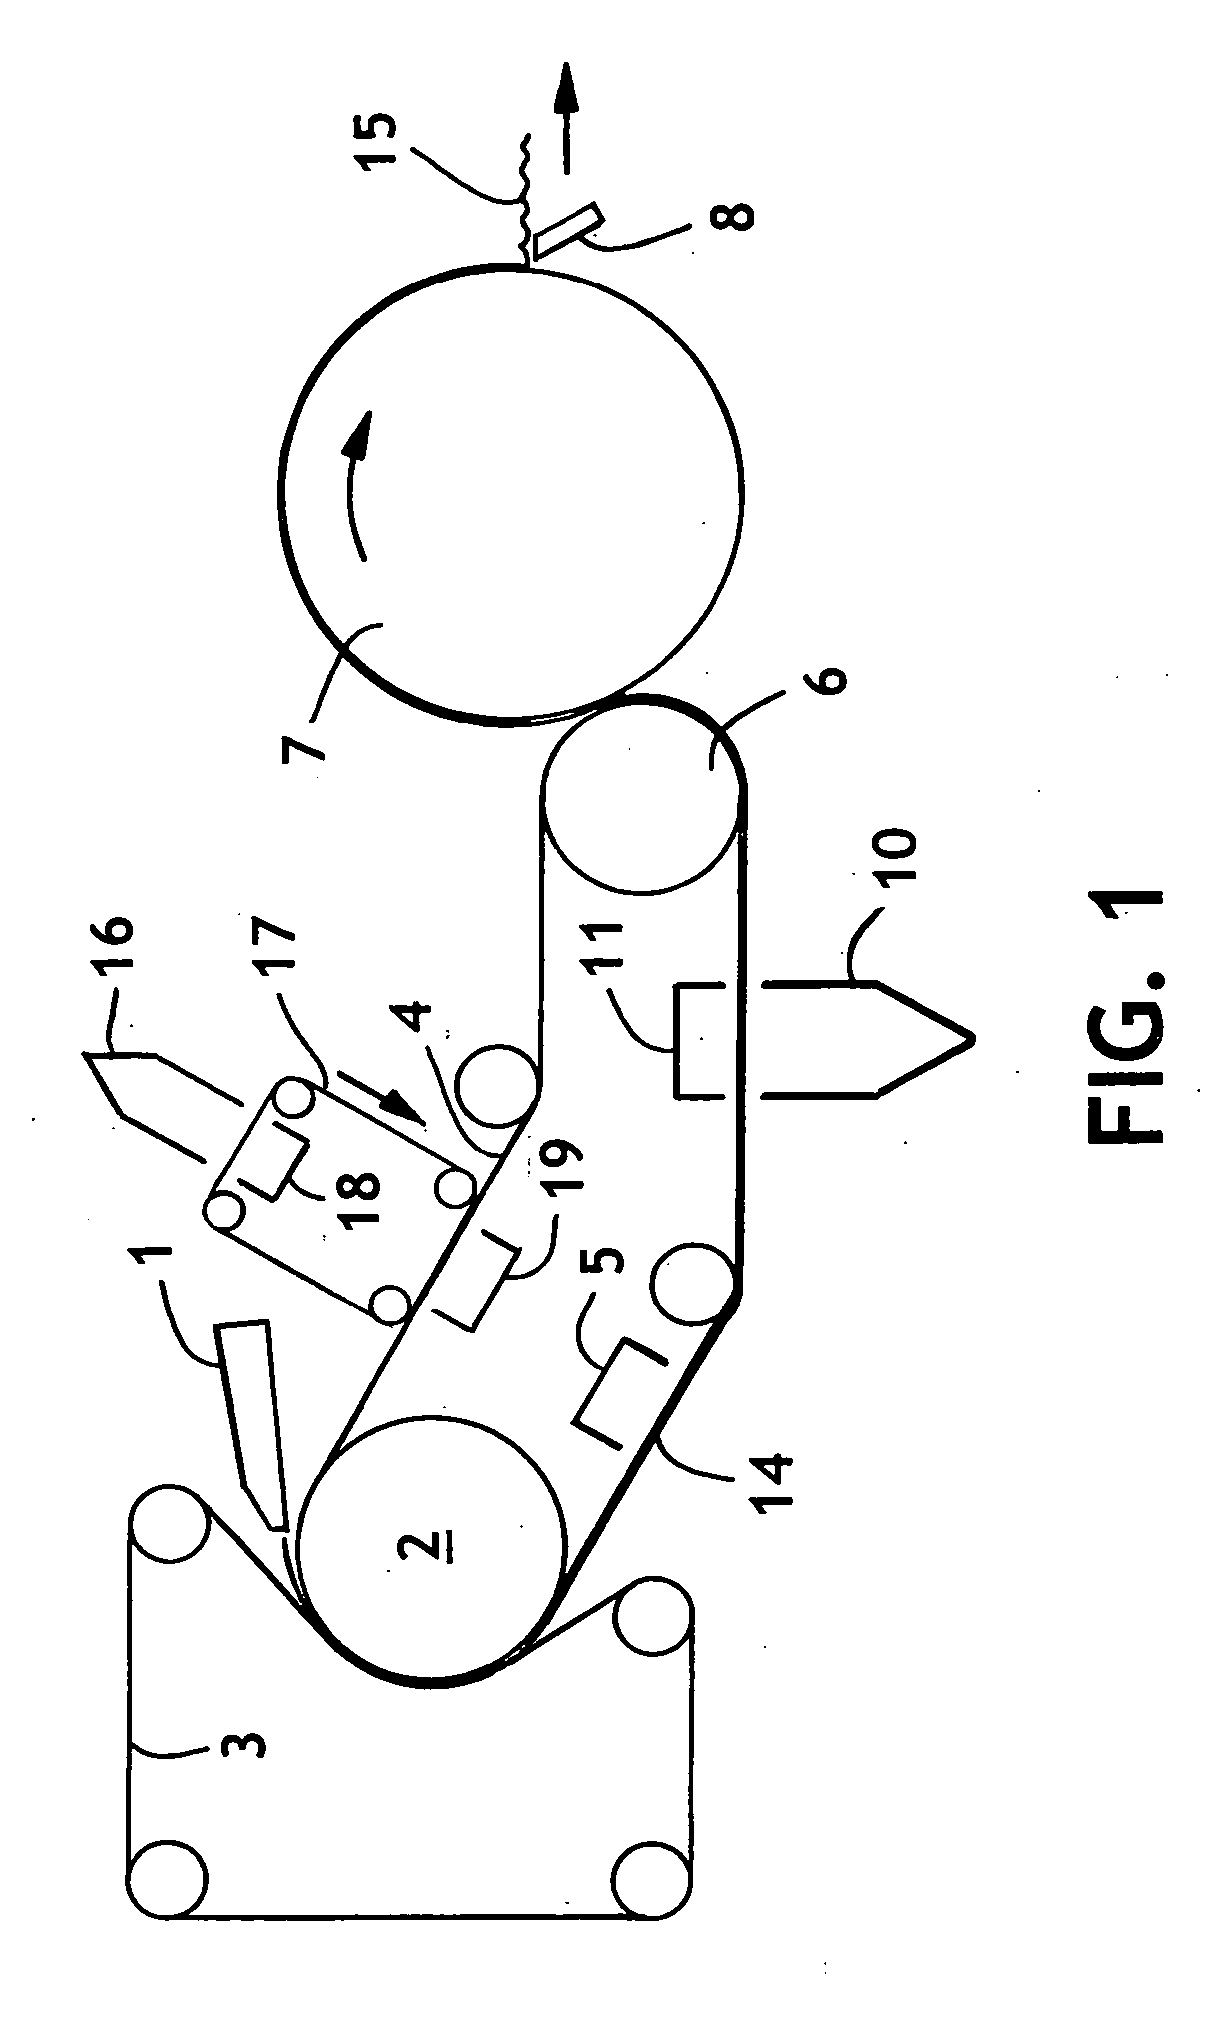 Wet-laid tissue sheet having an air-laid outer surface